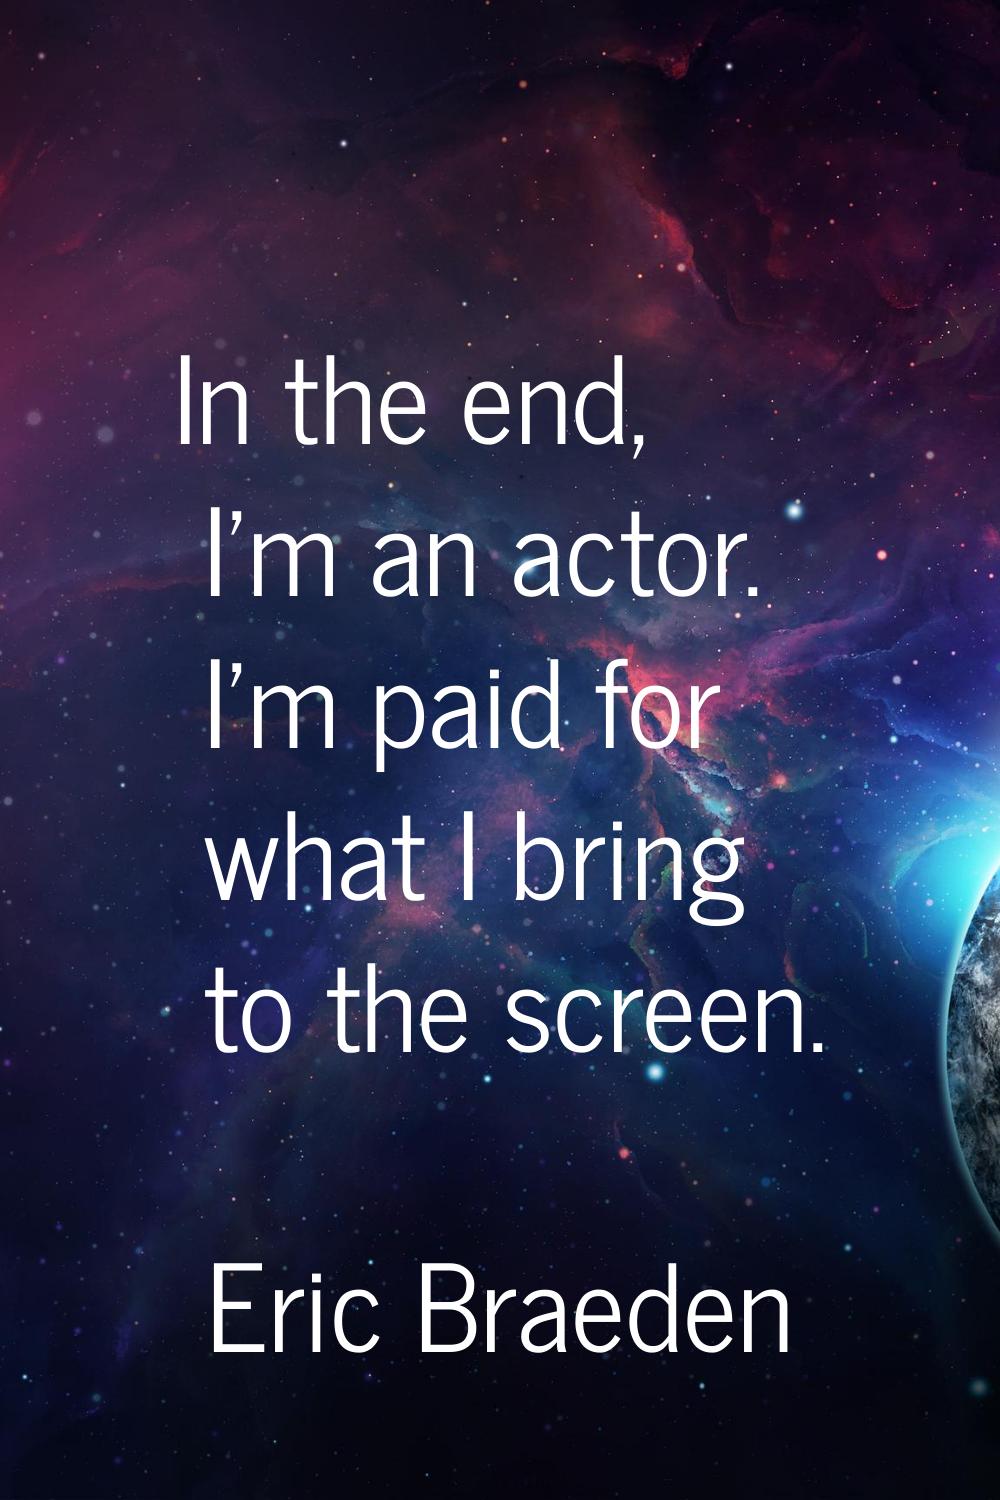 In the end, I'm an actor. I'm paid for what I bring to the screen.